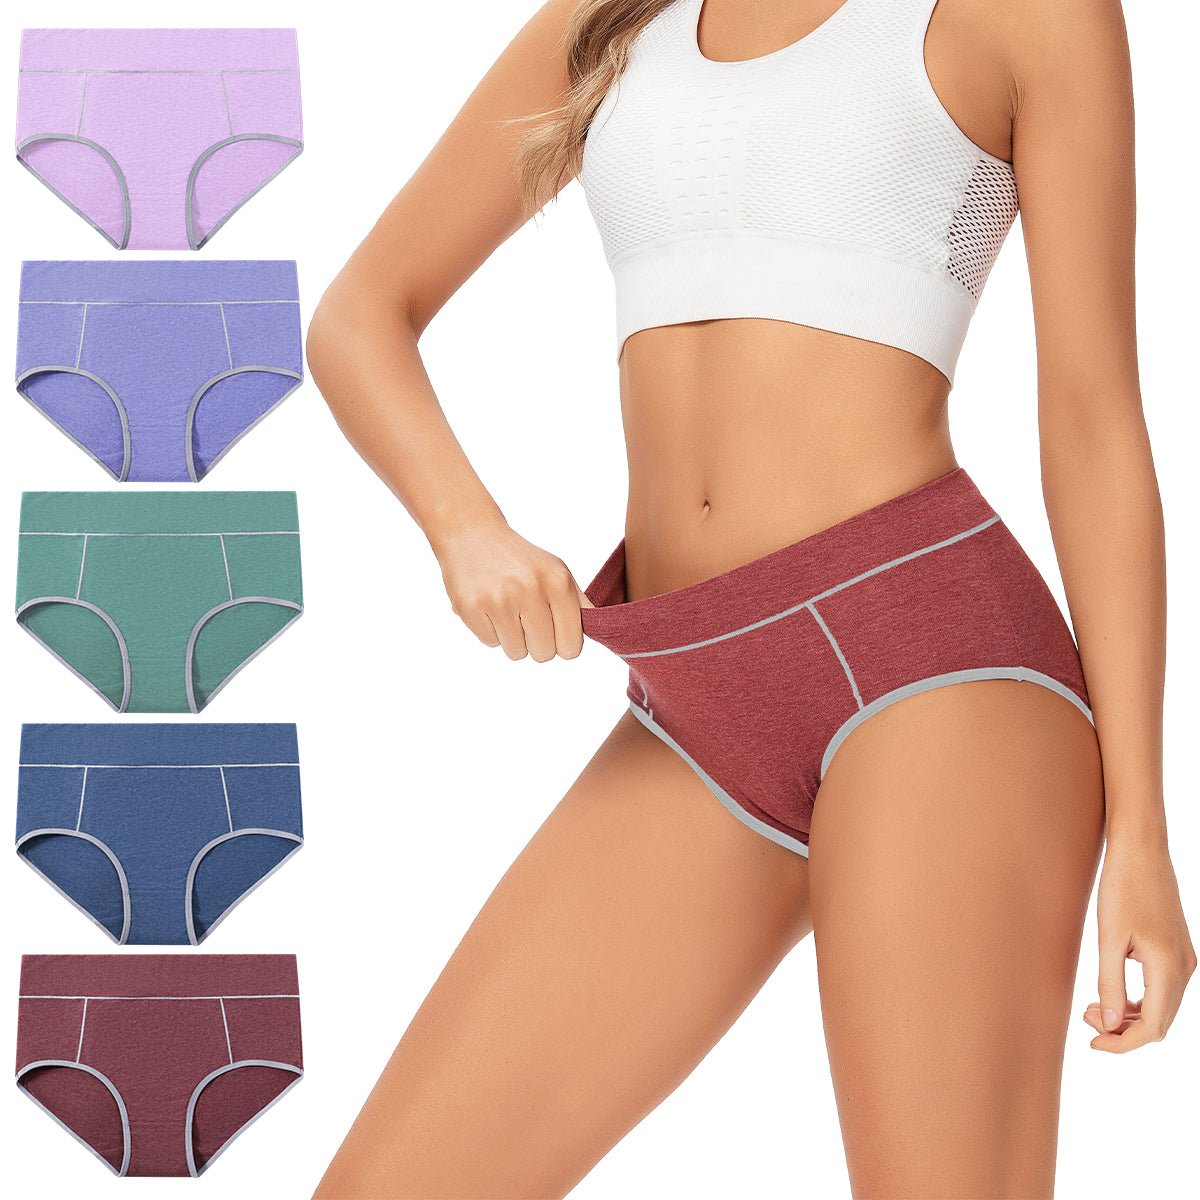 Womens High Waisted Cotton Underwear Soft Full Briefs Panties Multipack  From Qiaomaidou02, $22.33